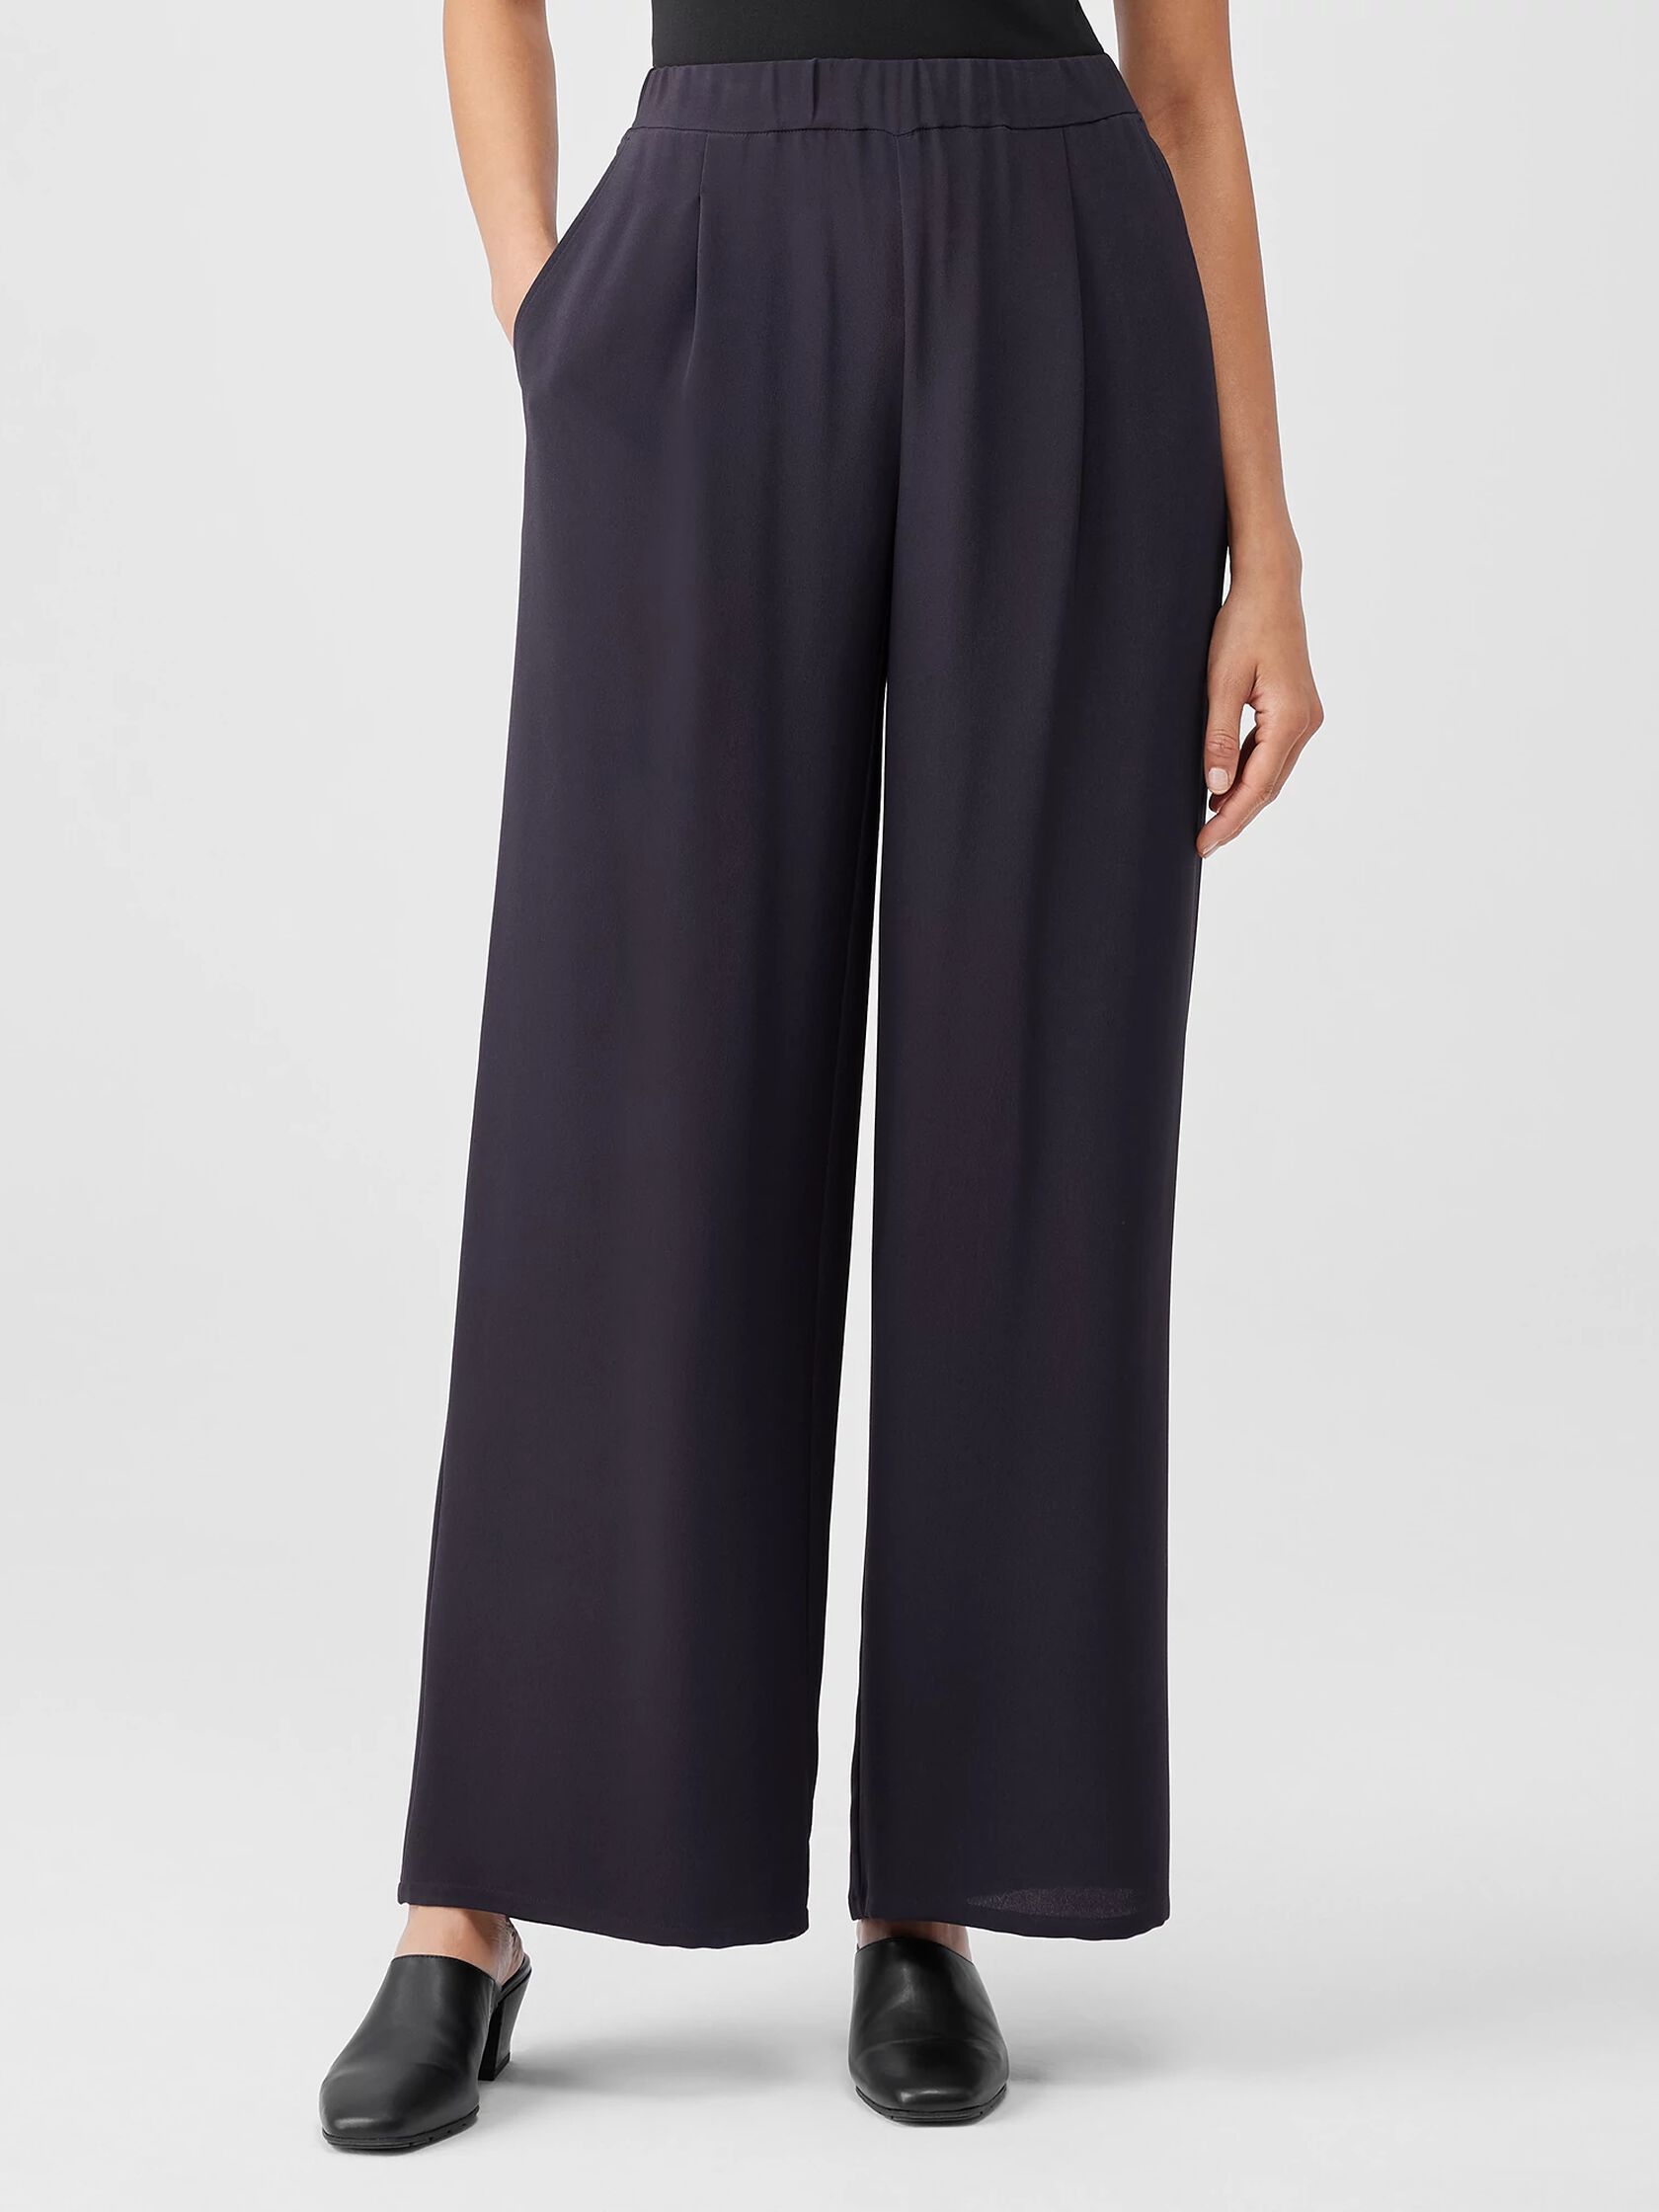 Silk Double Crepe Wide-Leg Pant | EILEEN FISHER